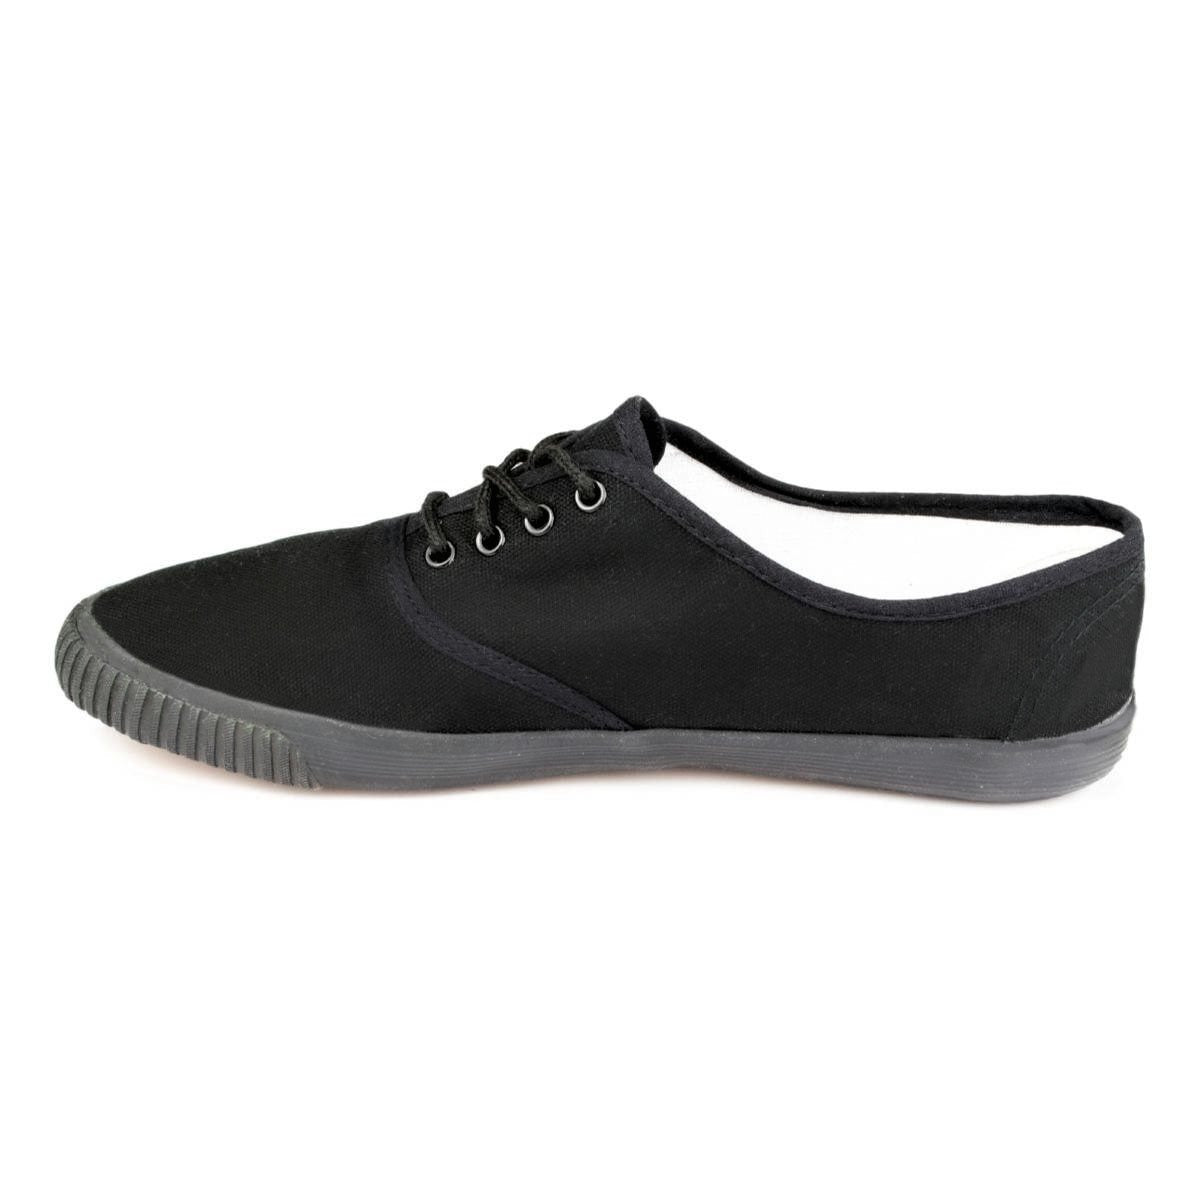 Plimsoll Black Lace up - Watney Shoes 